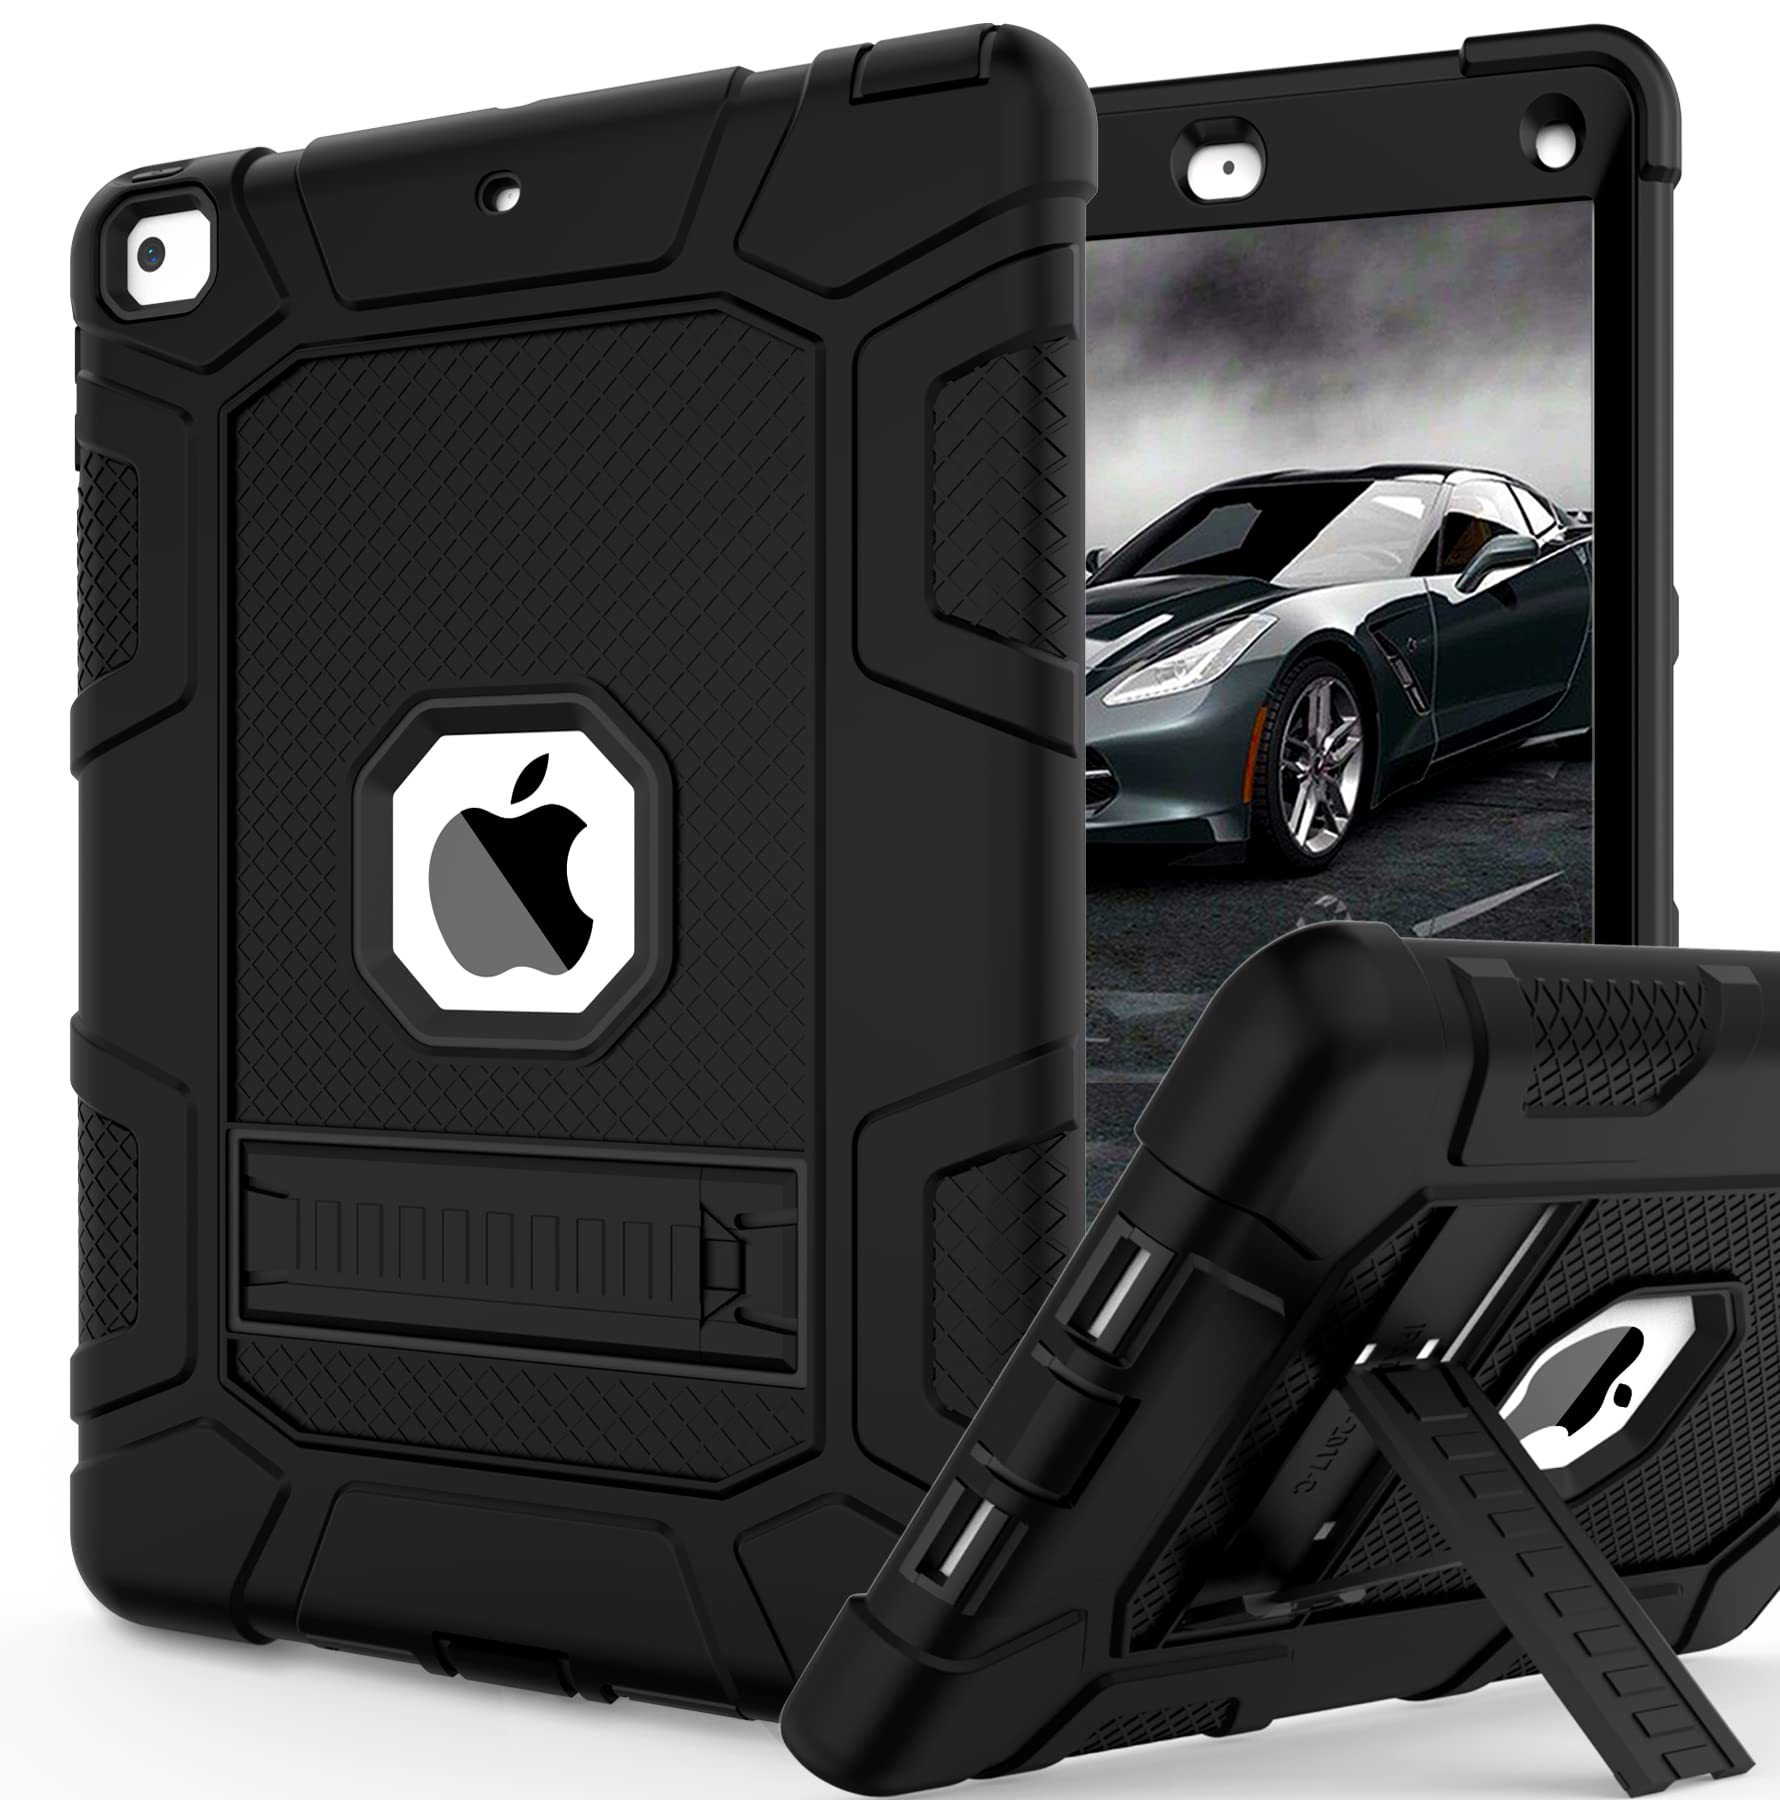 Book Cover iPad Mini 5 Case, iPad Mini 4 Case, Hybrid Three Layer Armor Shockproof Rugged Drop Protection Cover Case Built with Kickstand for iPad Mini 4 / 5 7.9 Inch Black